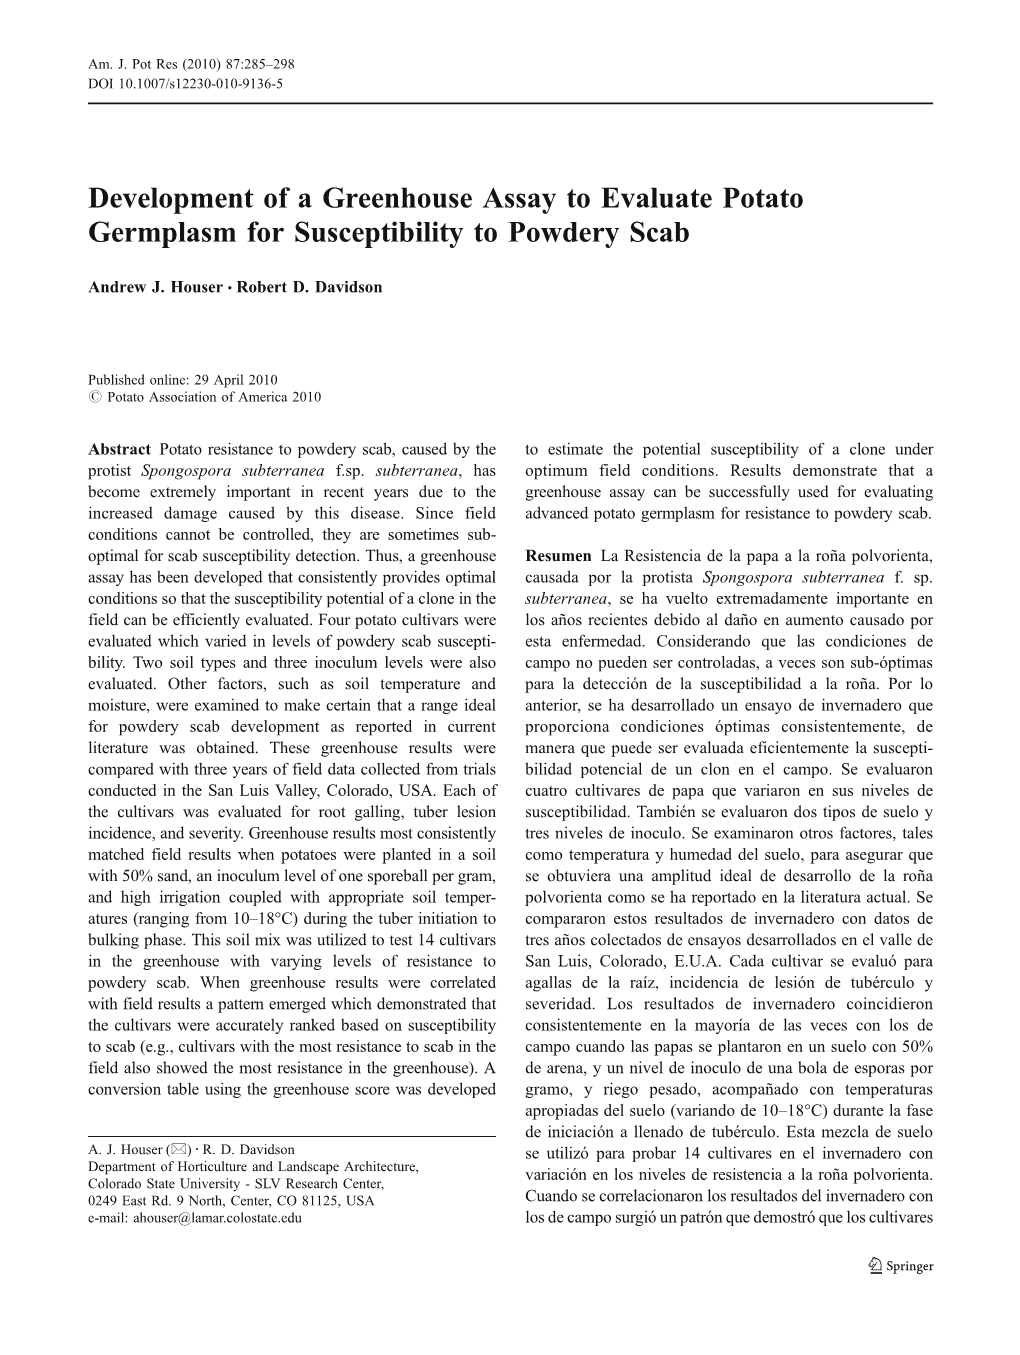 Development of a Greenhouse Assay to Evaluate Potato Germplasm for Susceptibility to Powdery Scab